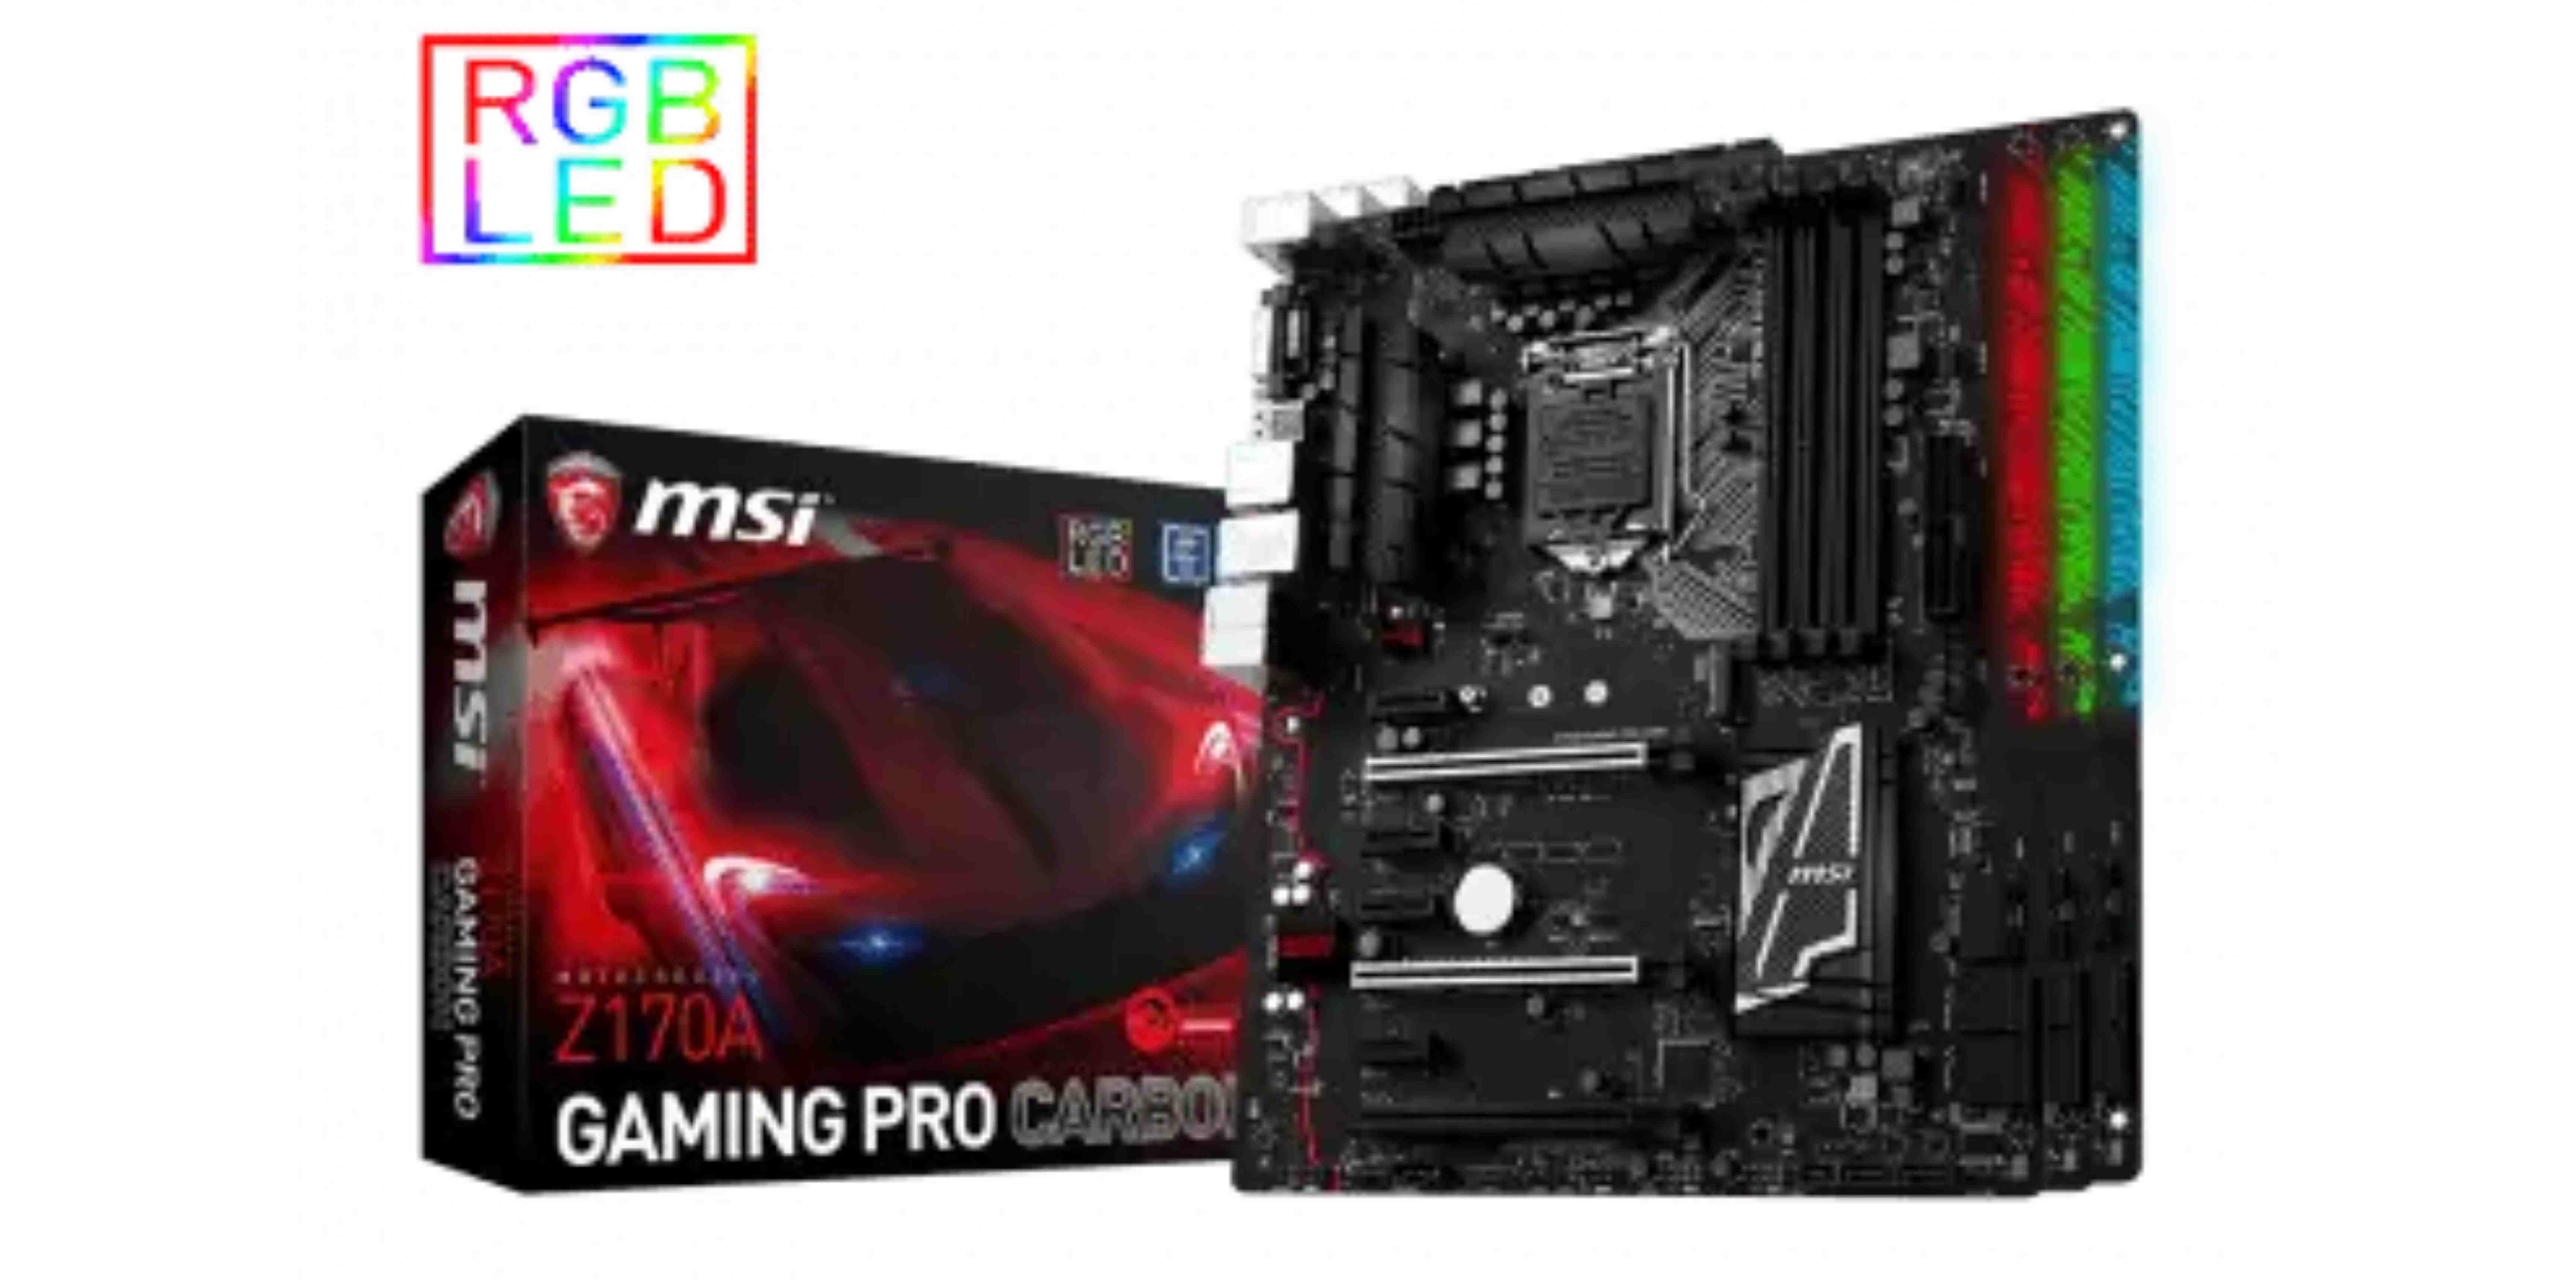 MSI Z170A Gaming Pro Carbon mining board with box